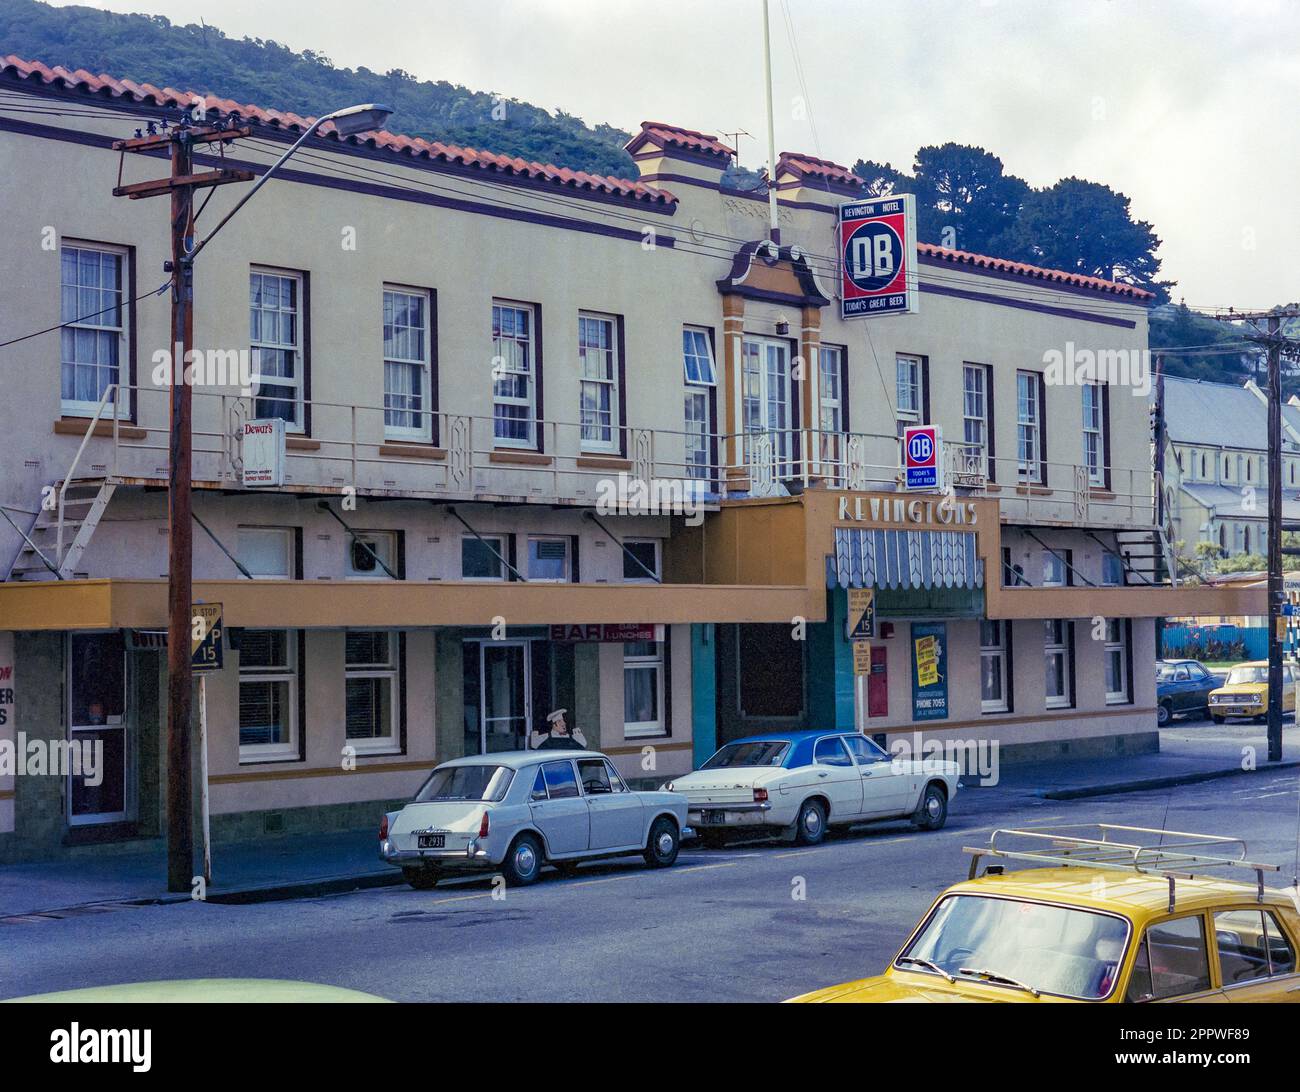 A 1981 historic image of the now demolished, Revingtons Hotel in Greymouth on the west coast of the South Island of New Zealand. Queen Elizabeth and Prince Philip stayed here during the Coronation Tour of 1954. Stock Photo